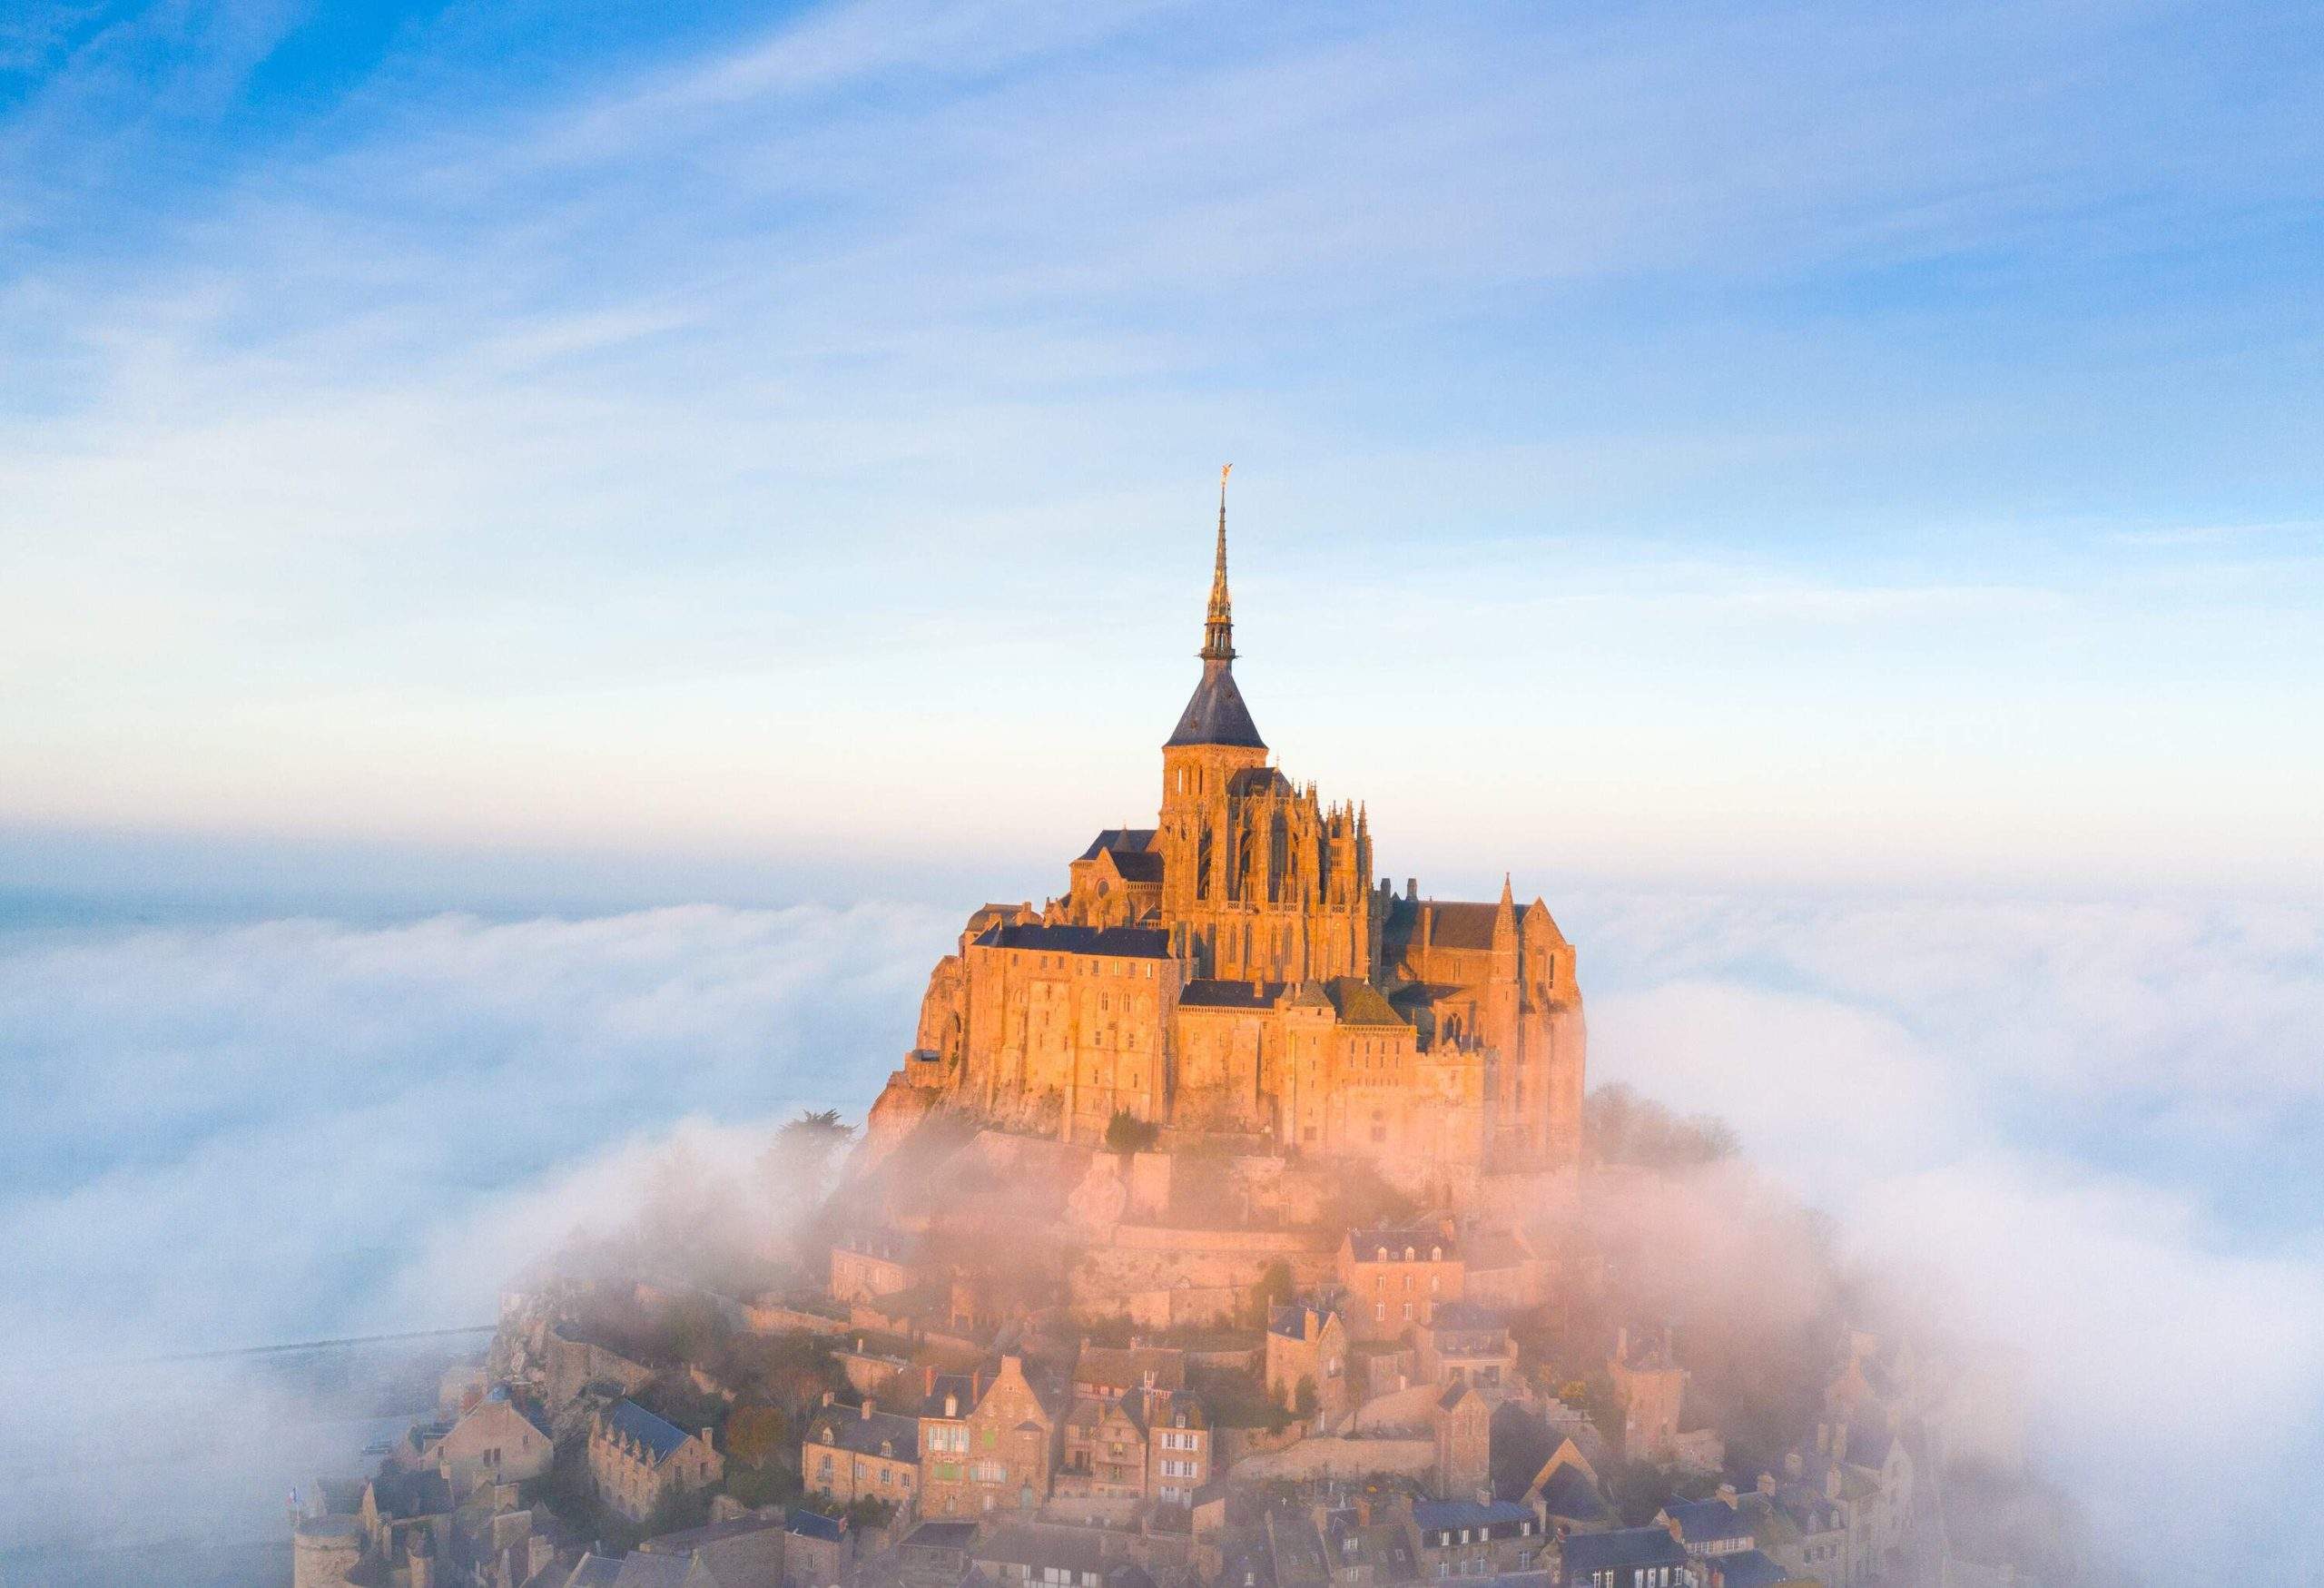 The island of Mont Saint-Michel is blanketed in mist except for the prominent abbey perched on its summit.